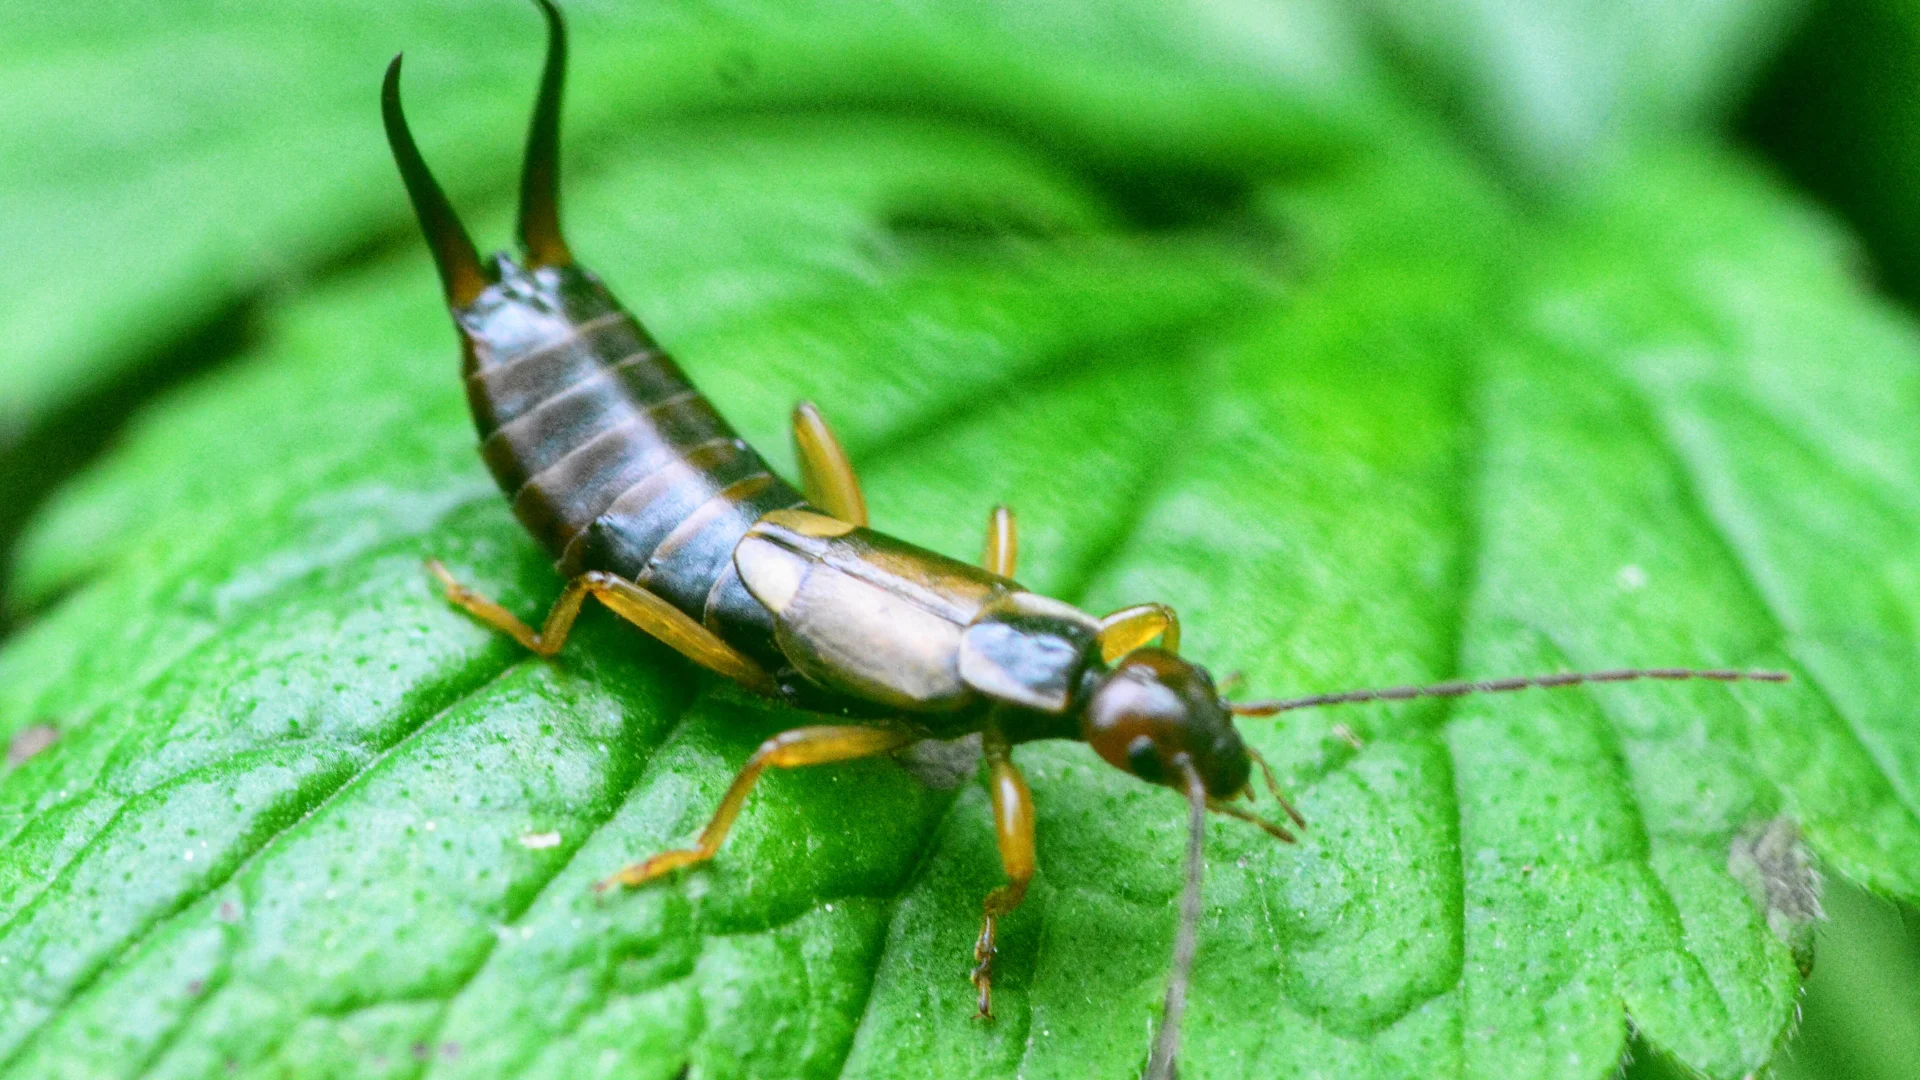 Earwigs in your home? Here's how to get them out